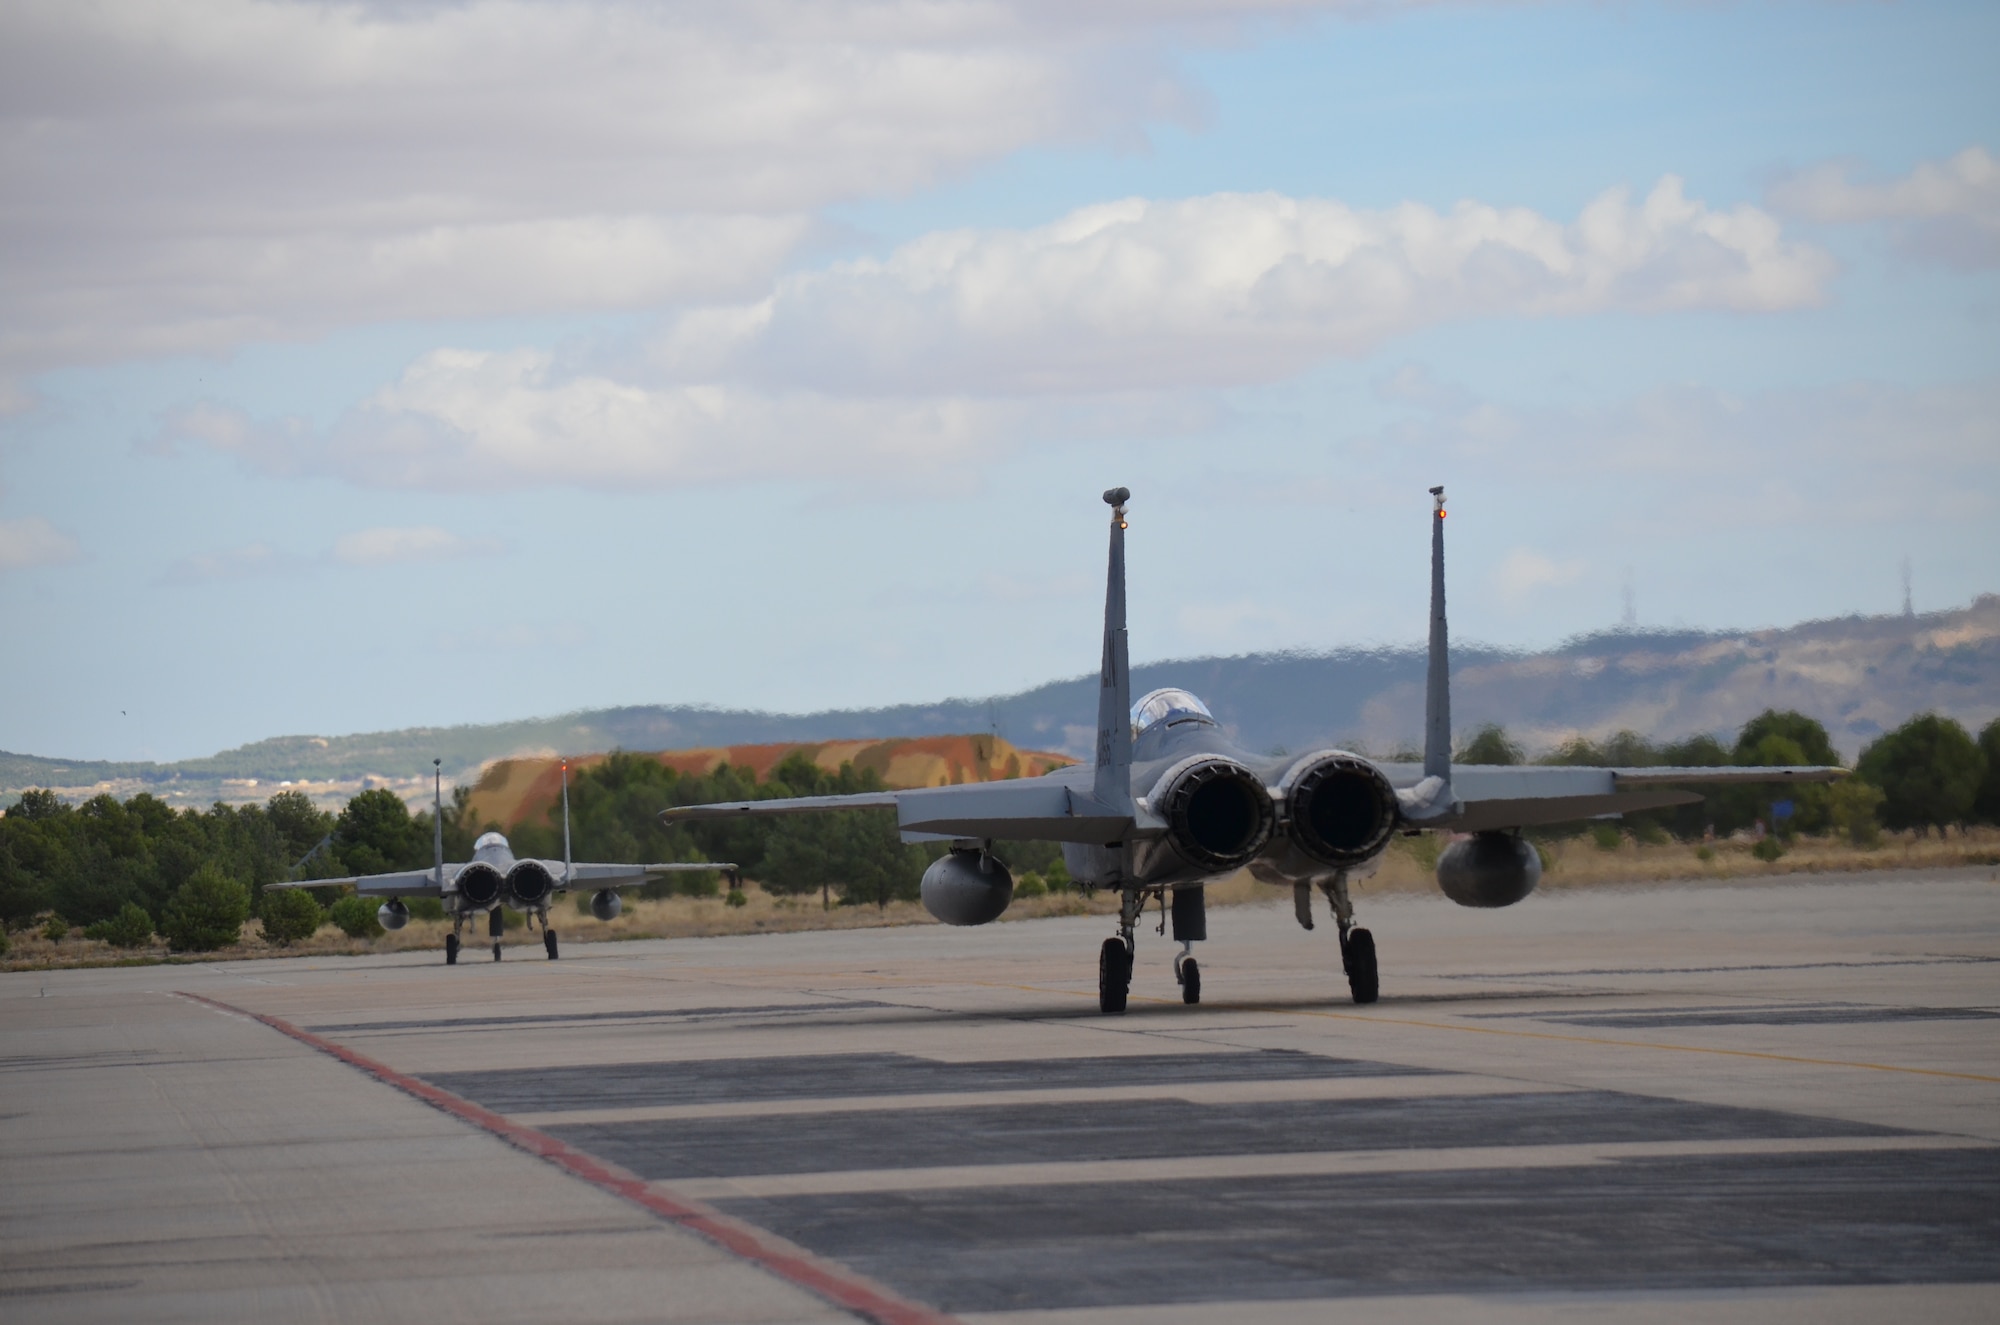 Crew members of the 48th Fight Wing prepare an F-15C Eagle for takeoff at the NATO Tactical Leadership Program in Albacete, Spain, Oct. 8, 2015. The program is a NATO mission commander’s school designed to provide multilateral training and increase interoperability amongst allied partners. (U.S. Air Force photo/Capt. Sybil Taunton)